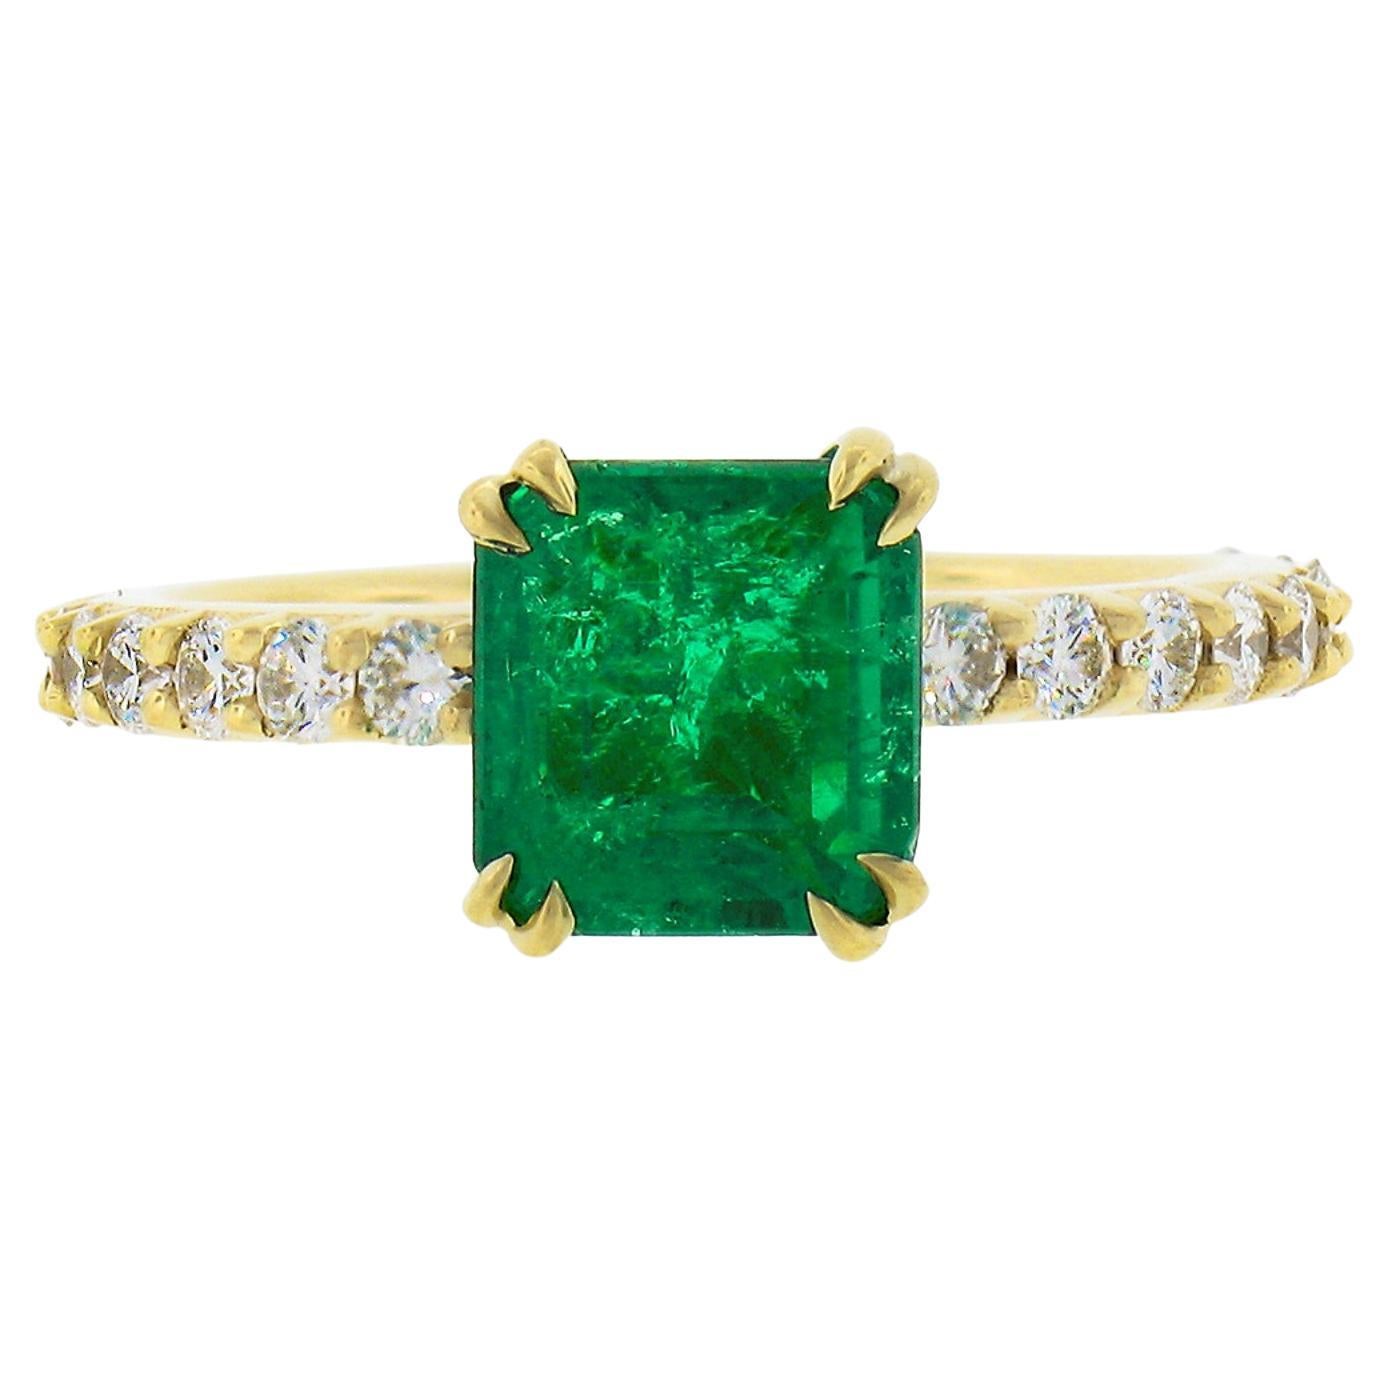 New 18K Gold 3.04ctw SSEF Colombian Emerald & Round Diamond Engagement Ring